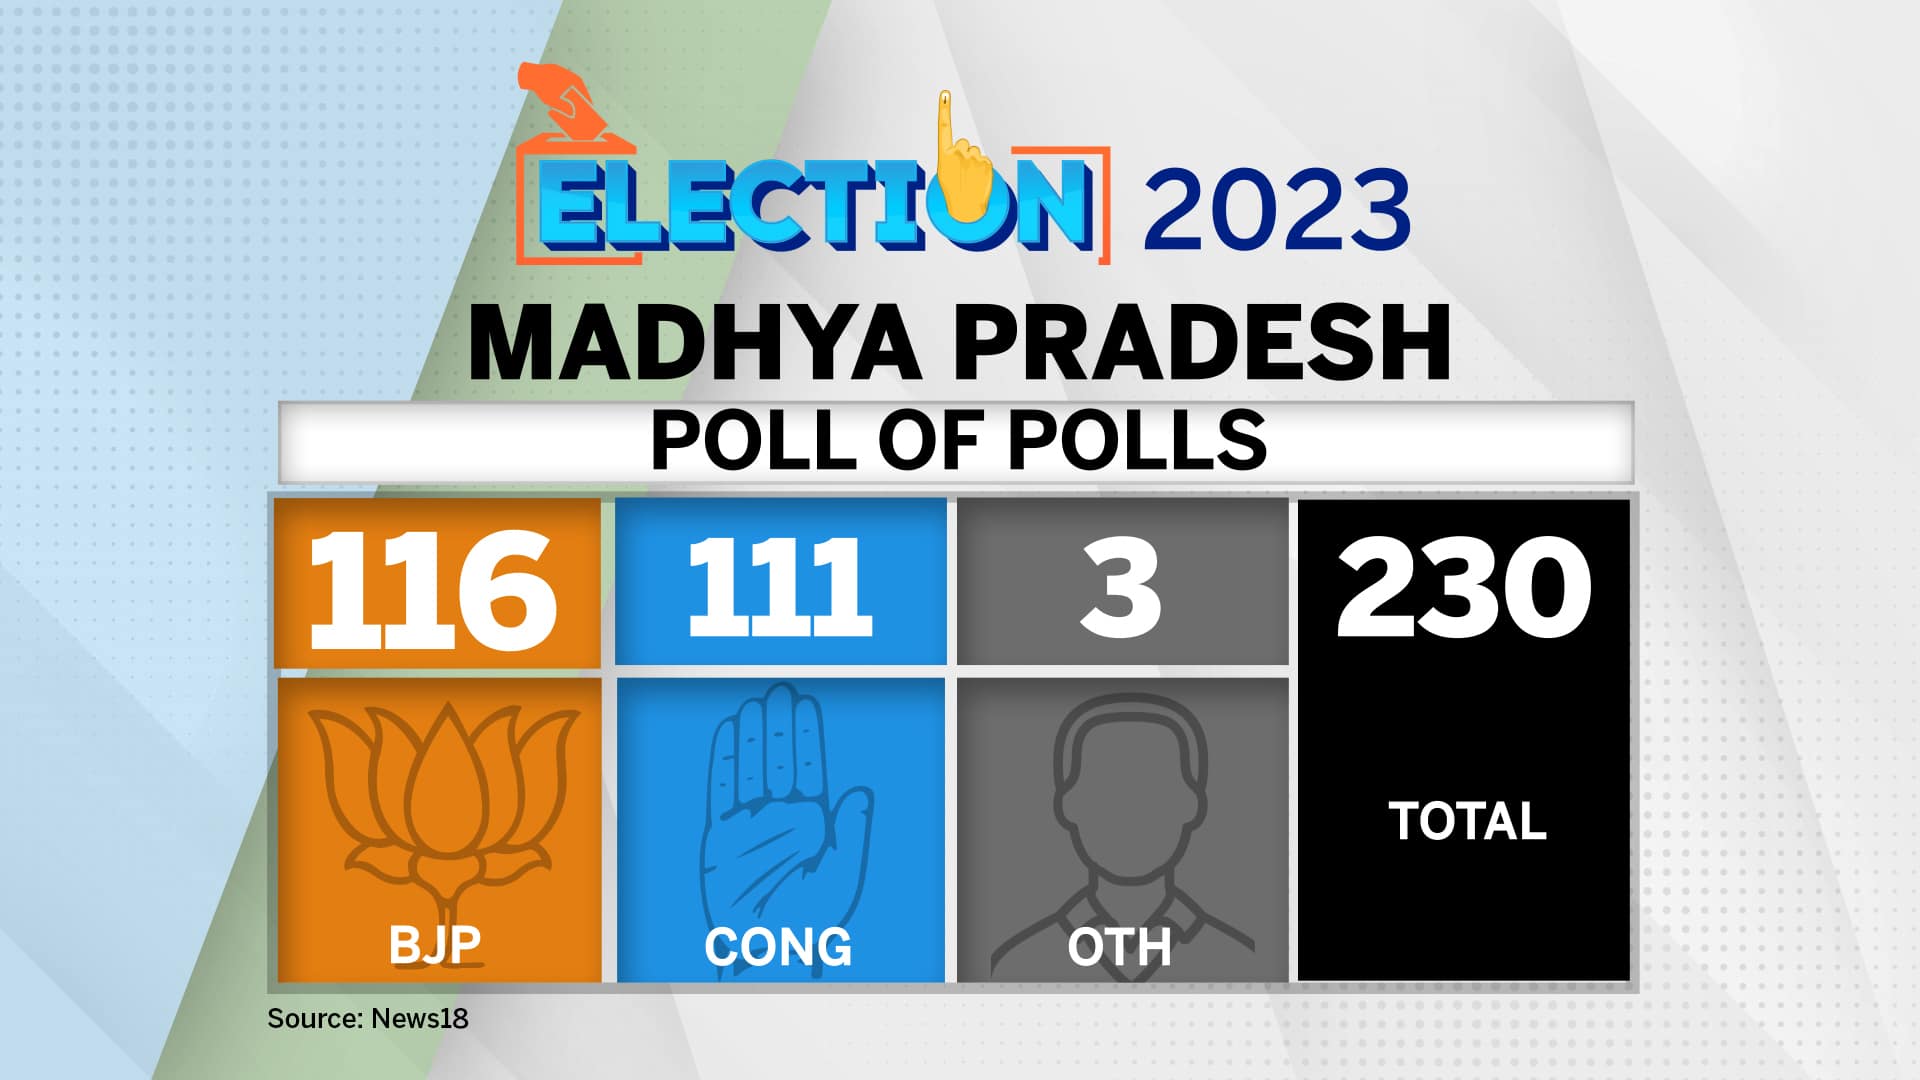 Exit Poll Results 2023 Cong leads in Chhattisgarh & Telangana, BJP